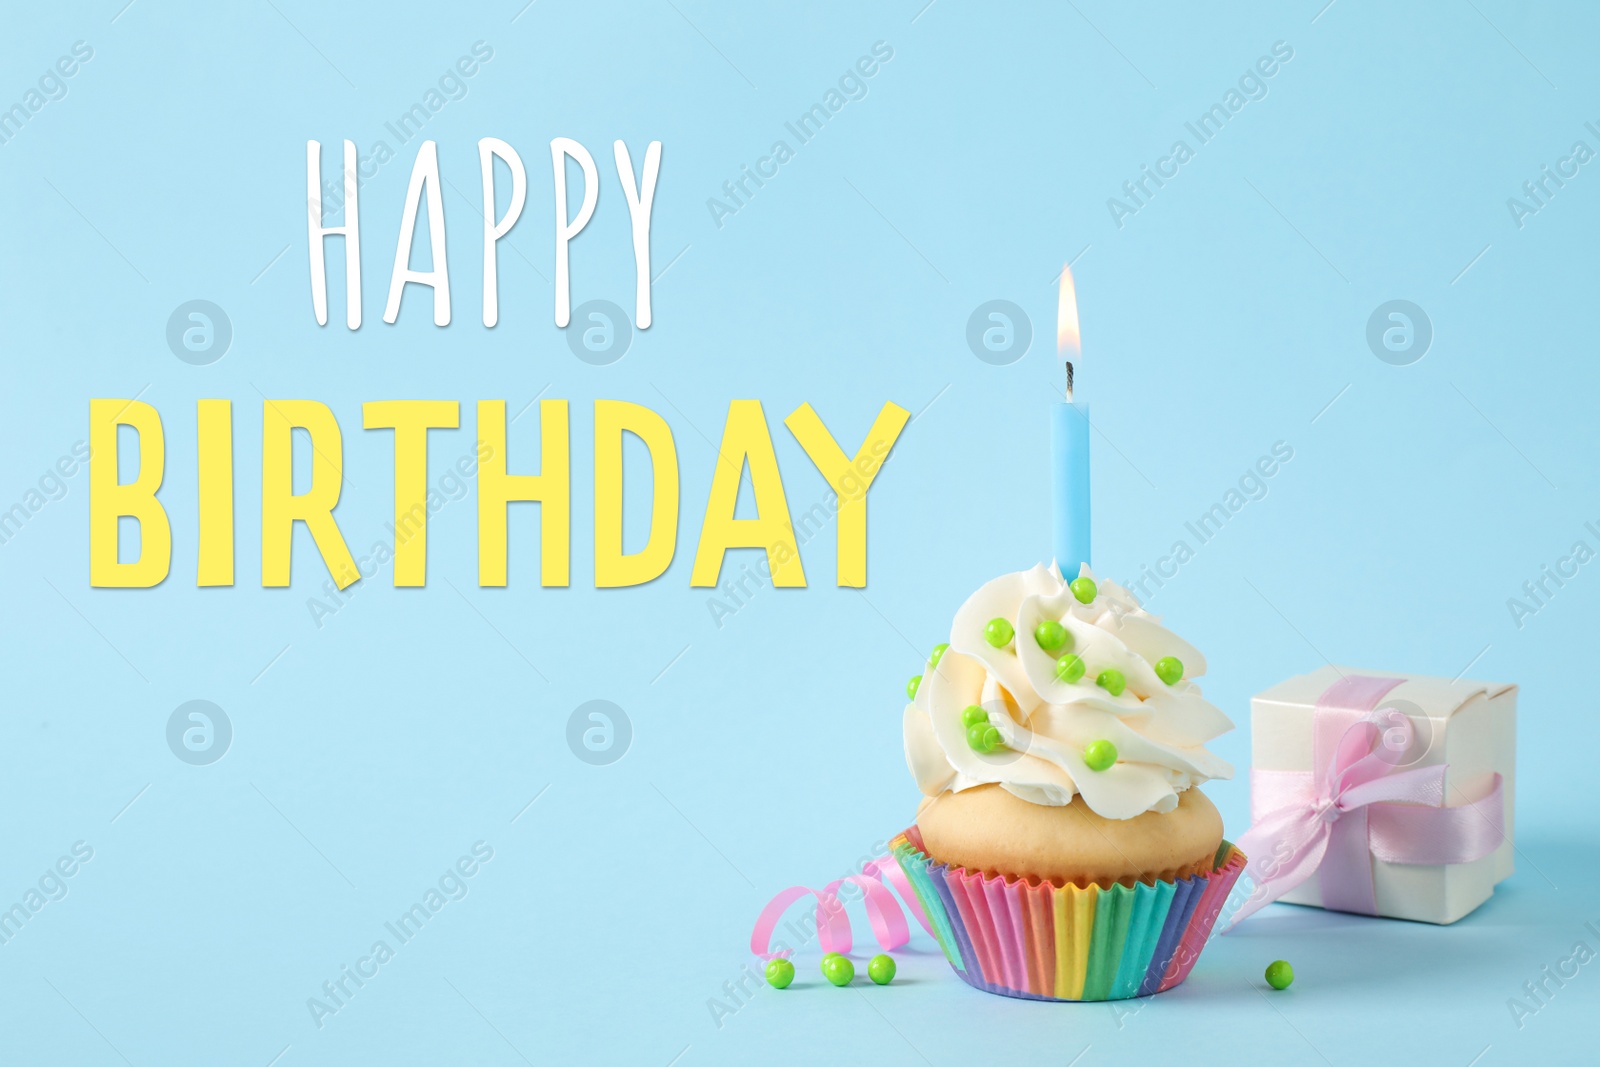 Image of Happy Birthday! Delicious cupcake with candle and gift box on light blue background